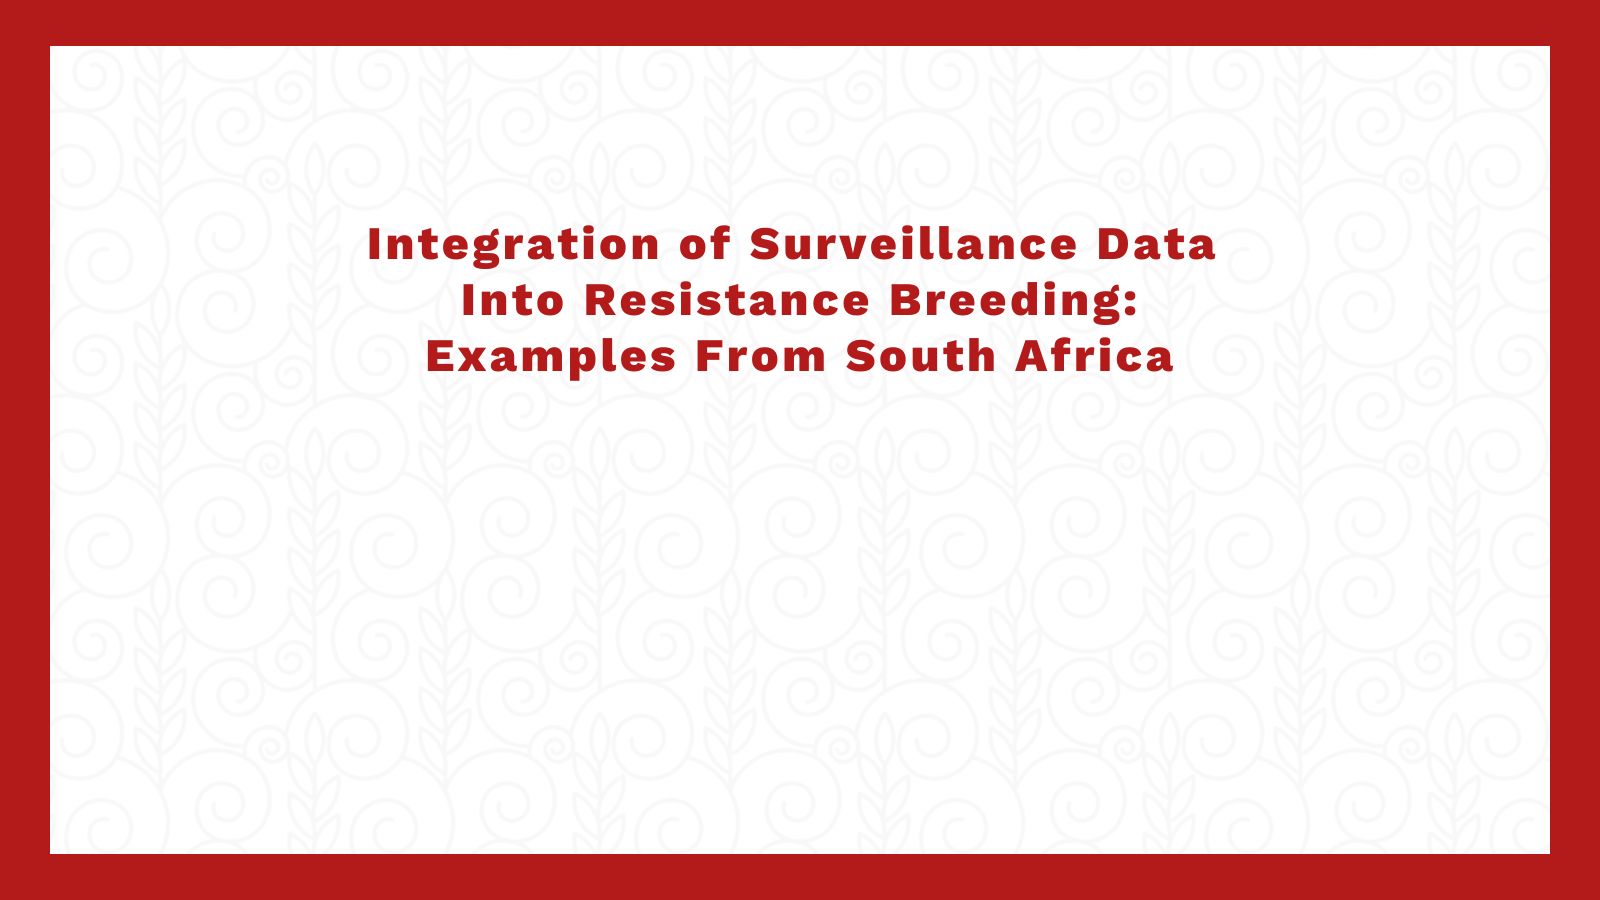 Integration of Surveillance Data Into Resistance Breeding: Examples From South Africa